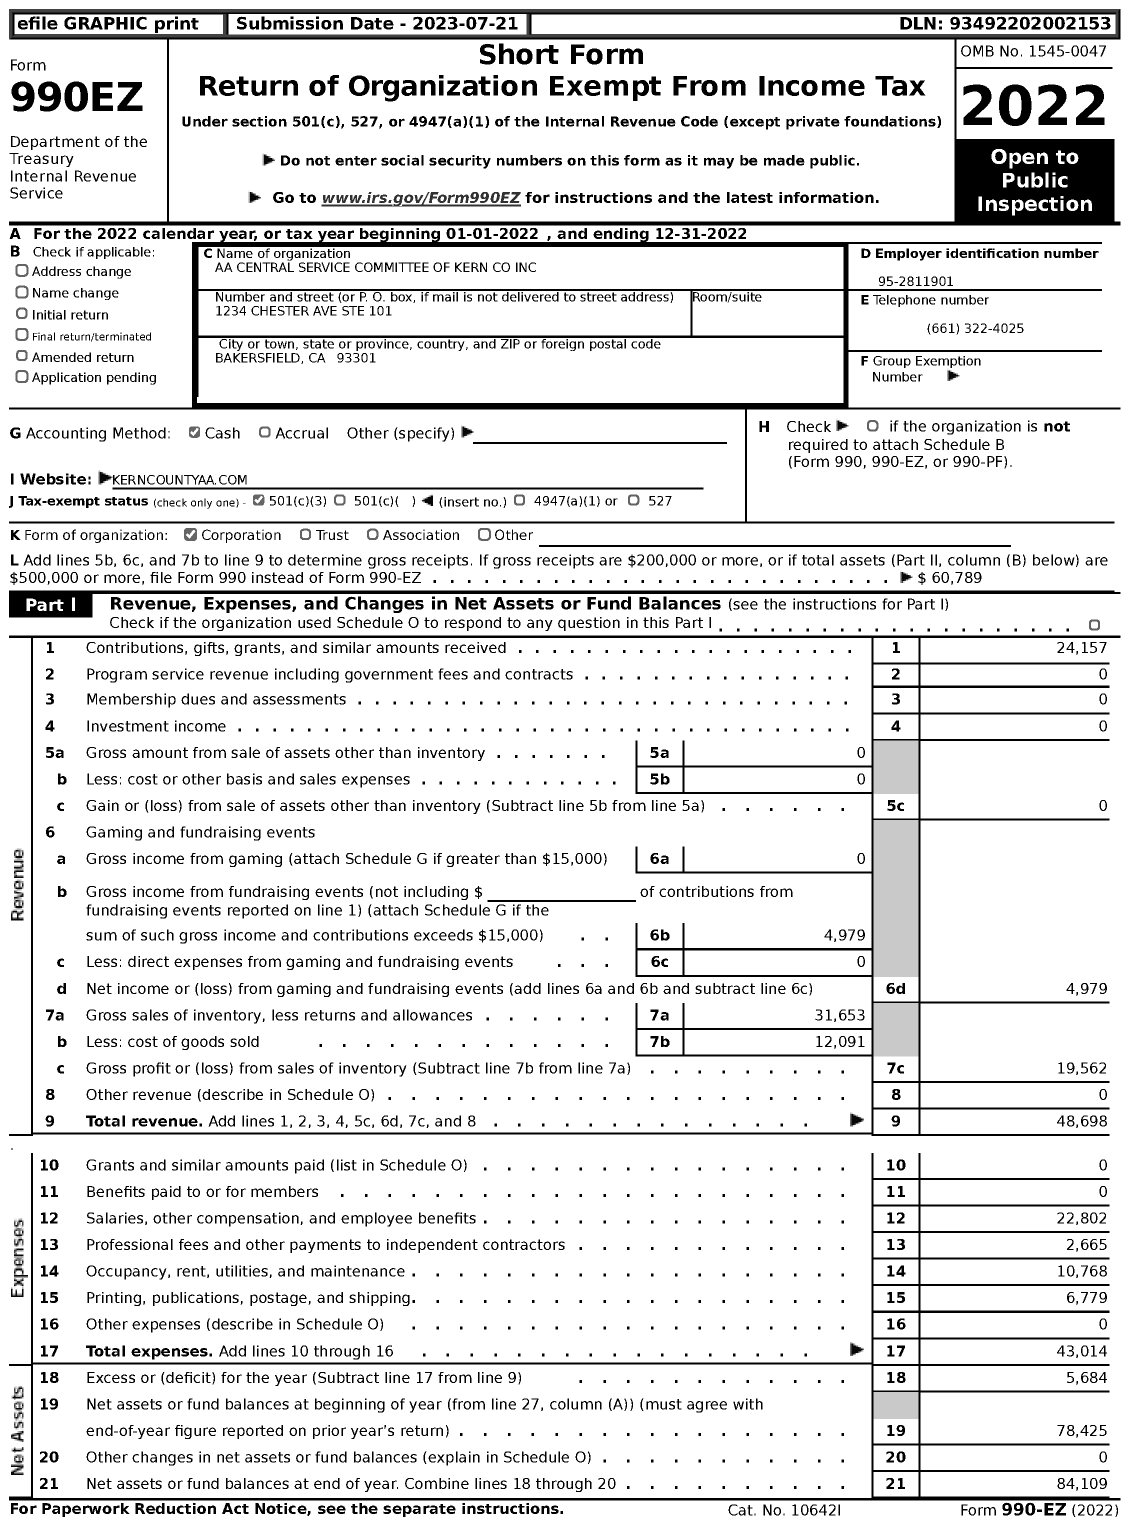 Image of first page of 2022 Form 990EZ for Aa Central Service Committee of Kern